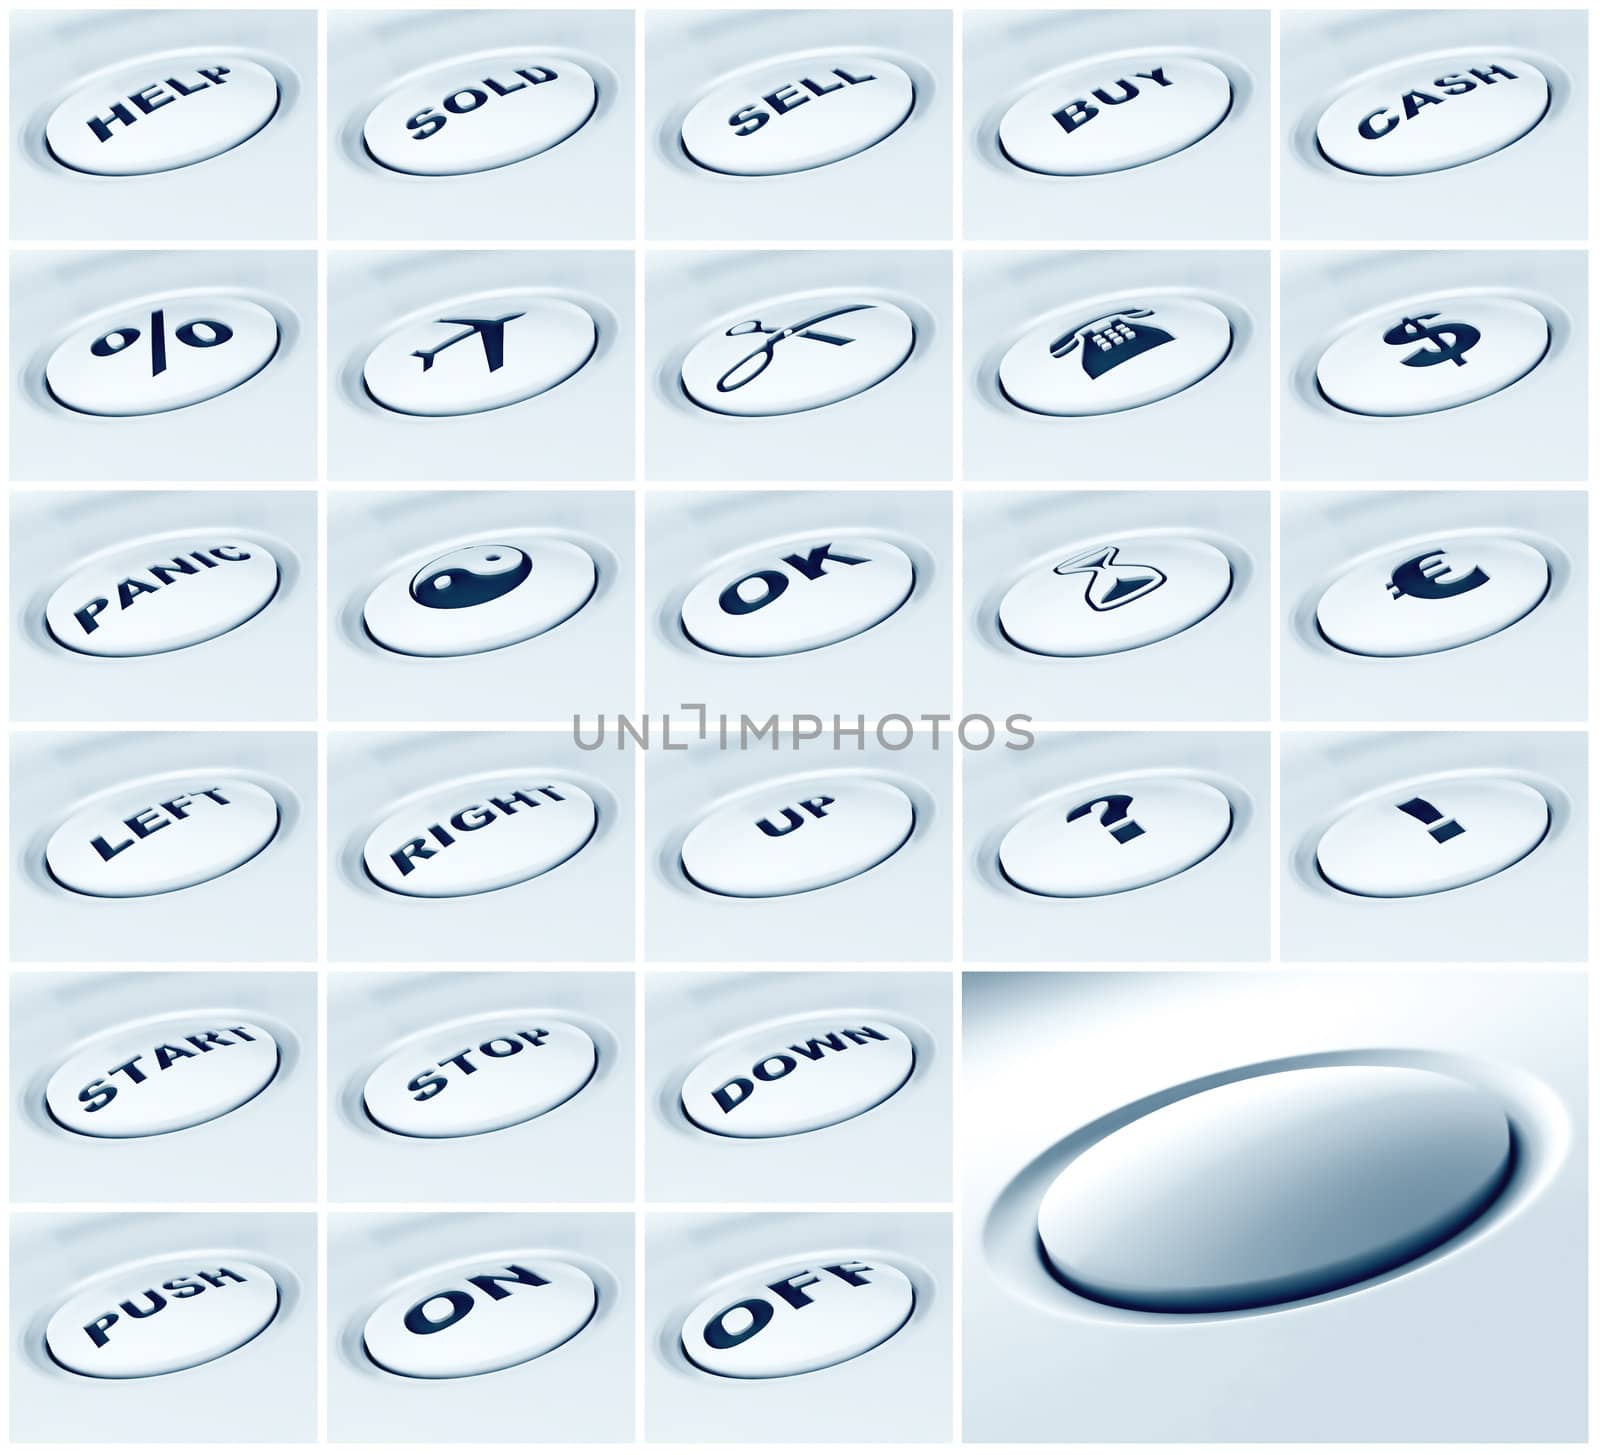 set of white plastic buttons with different signs and symbols by Serp